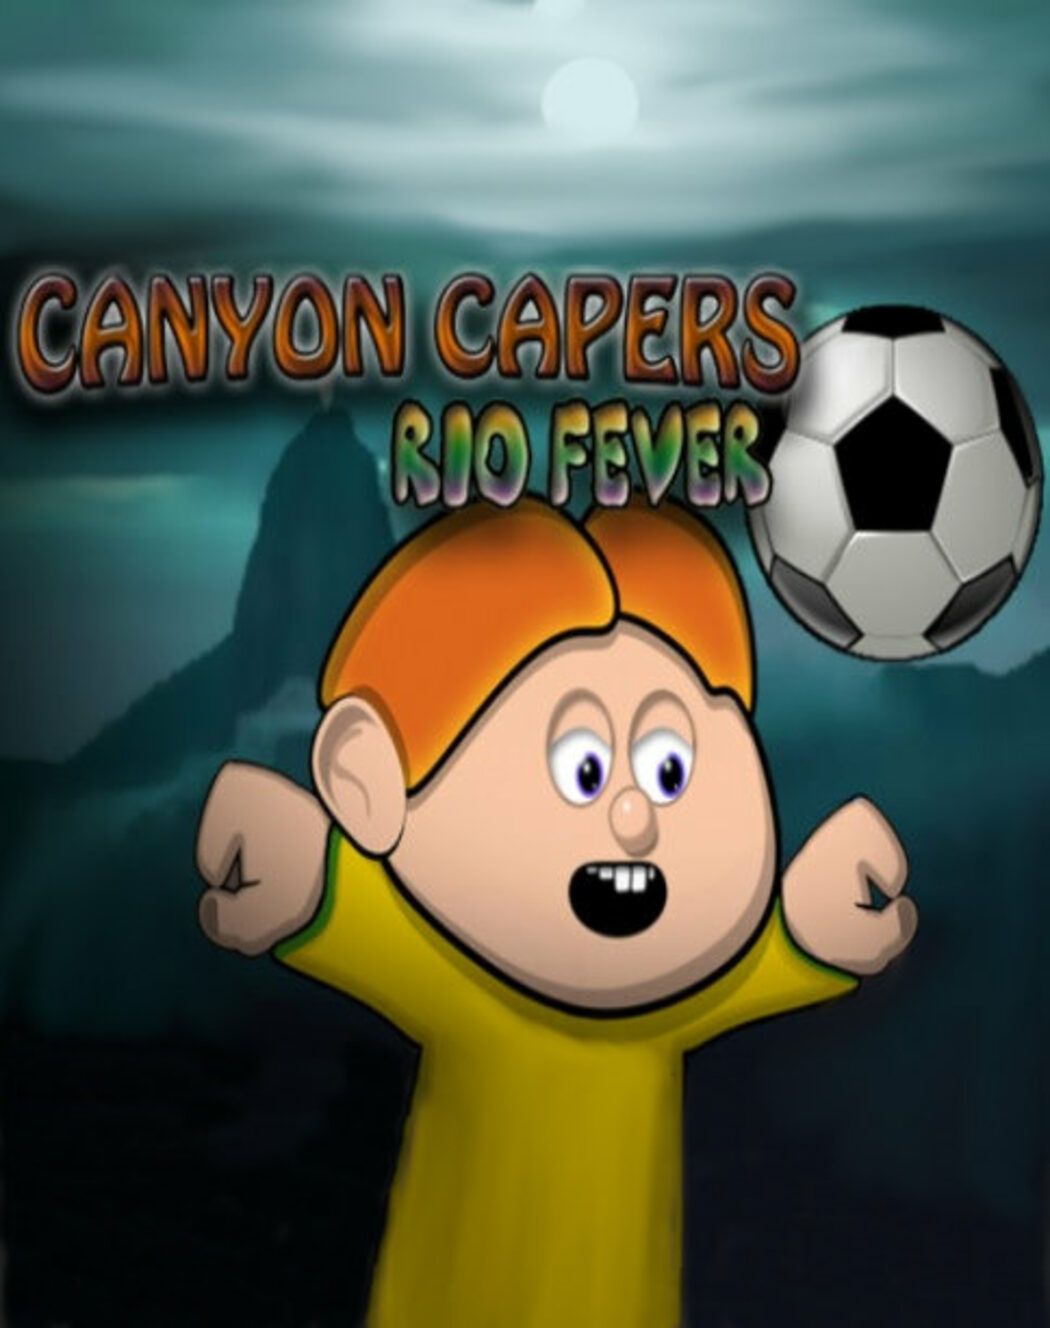 Canyon Capers | Rio Fever (DLC) - Steam Key - GLOBAL